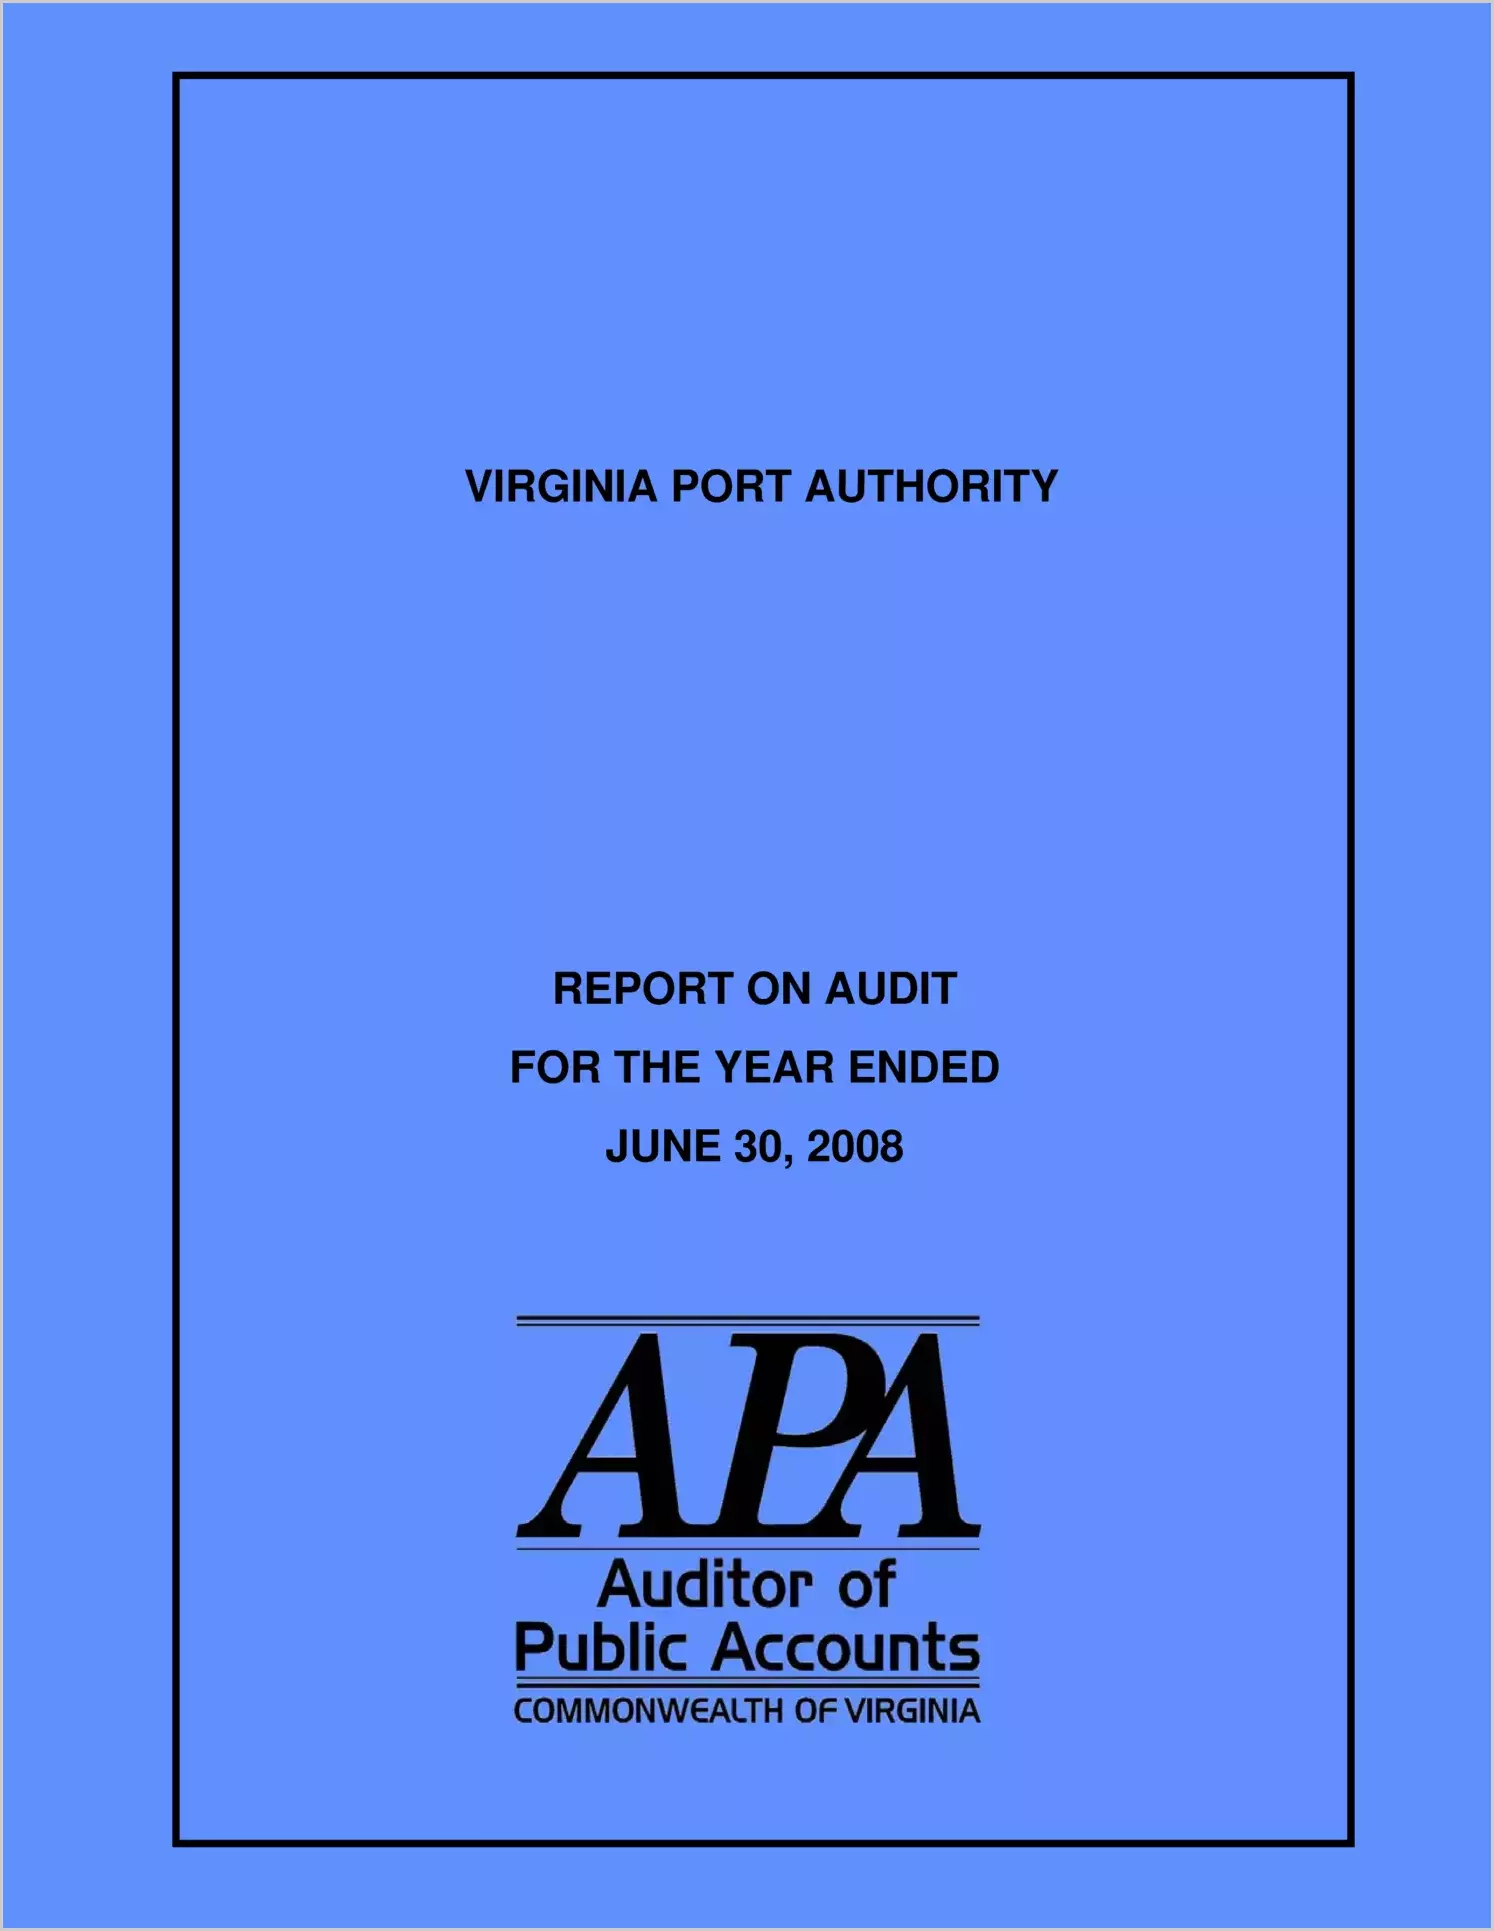 Virginia Port Authority for the year ended June 30, 2008